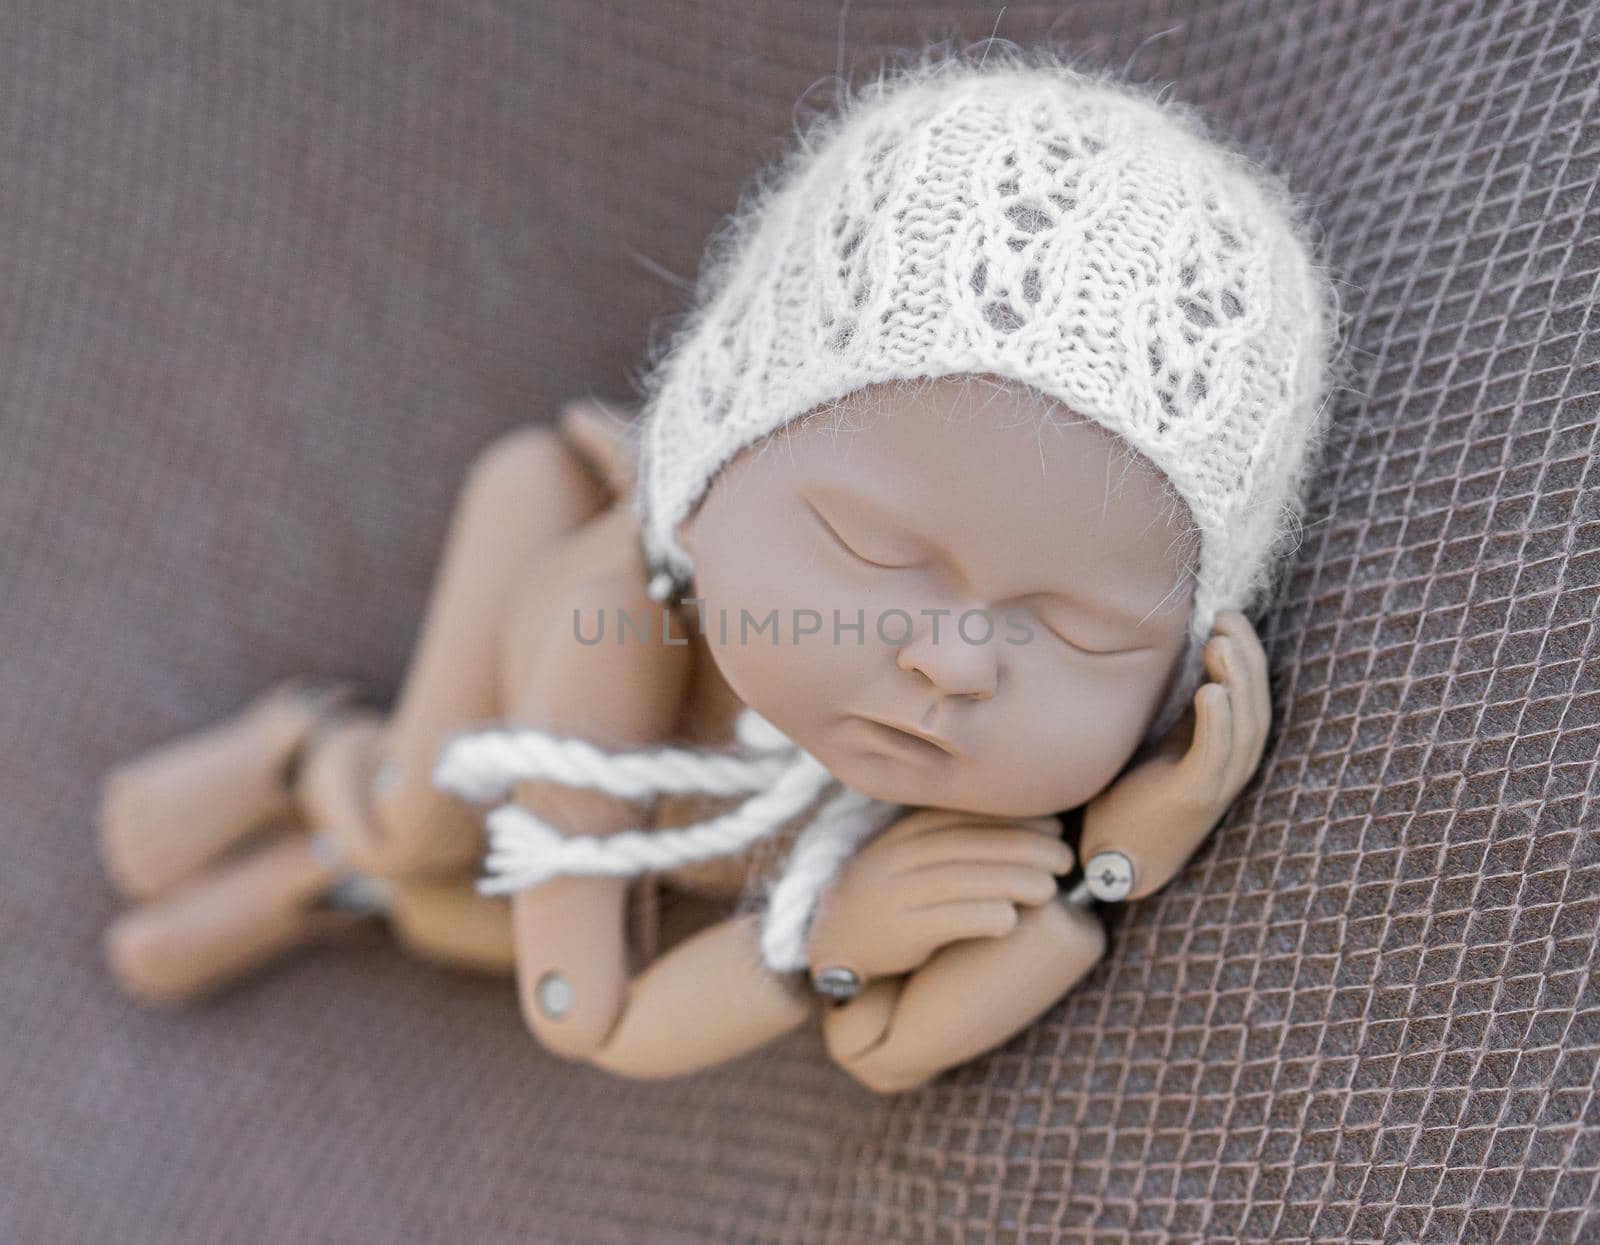 Precisely accurate mannequin of newborn in a hat for photo practicing